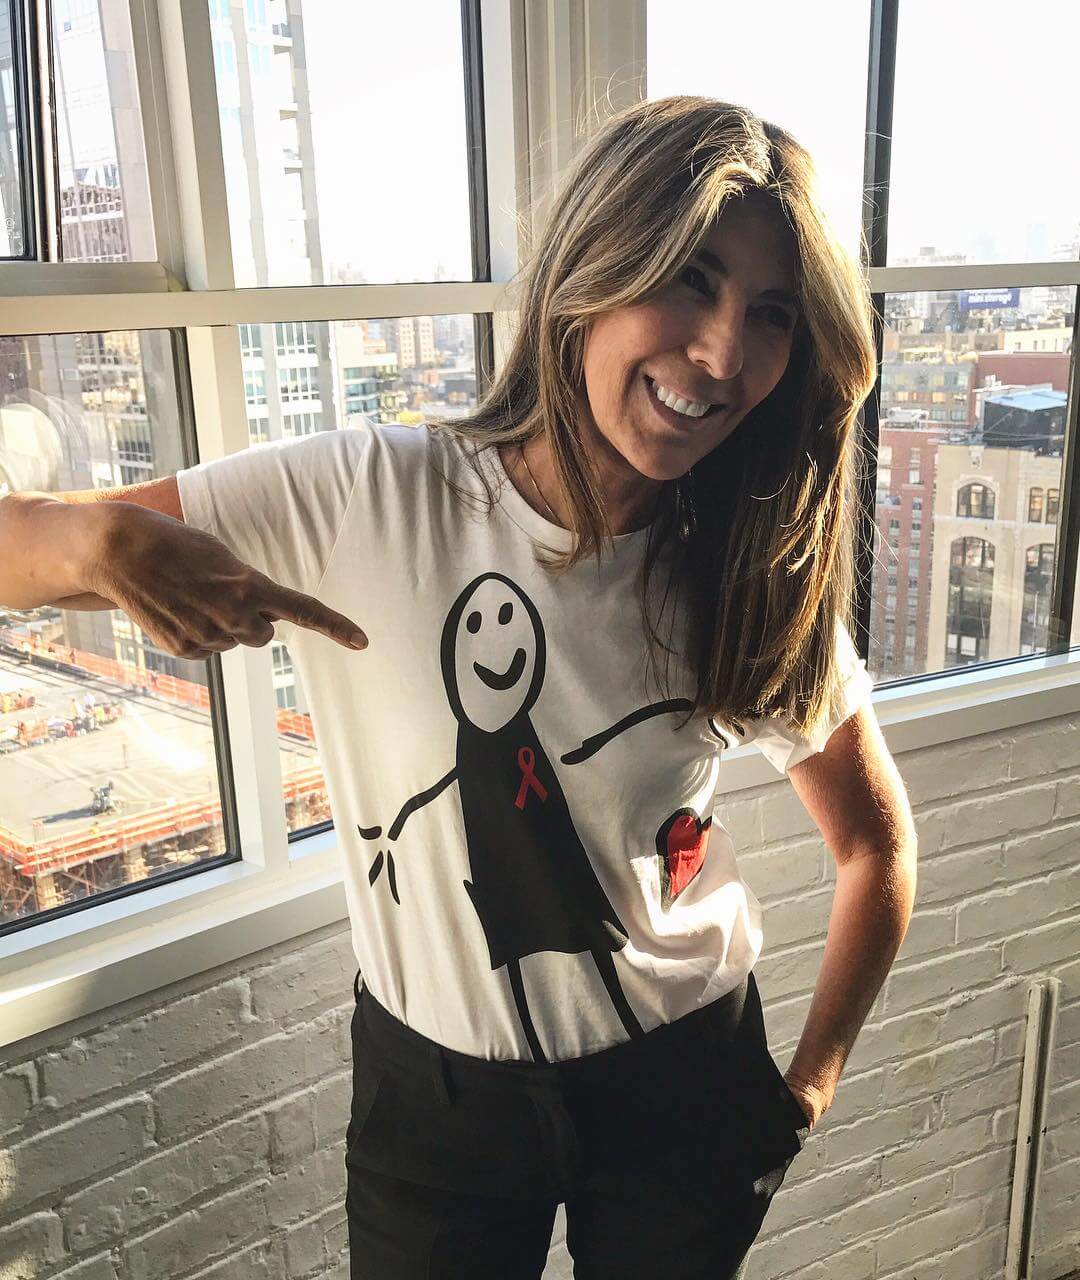 49 Hot Pictures Of Nina Garcia Will Make You Drool For Her | Best Of Comic Books